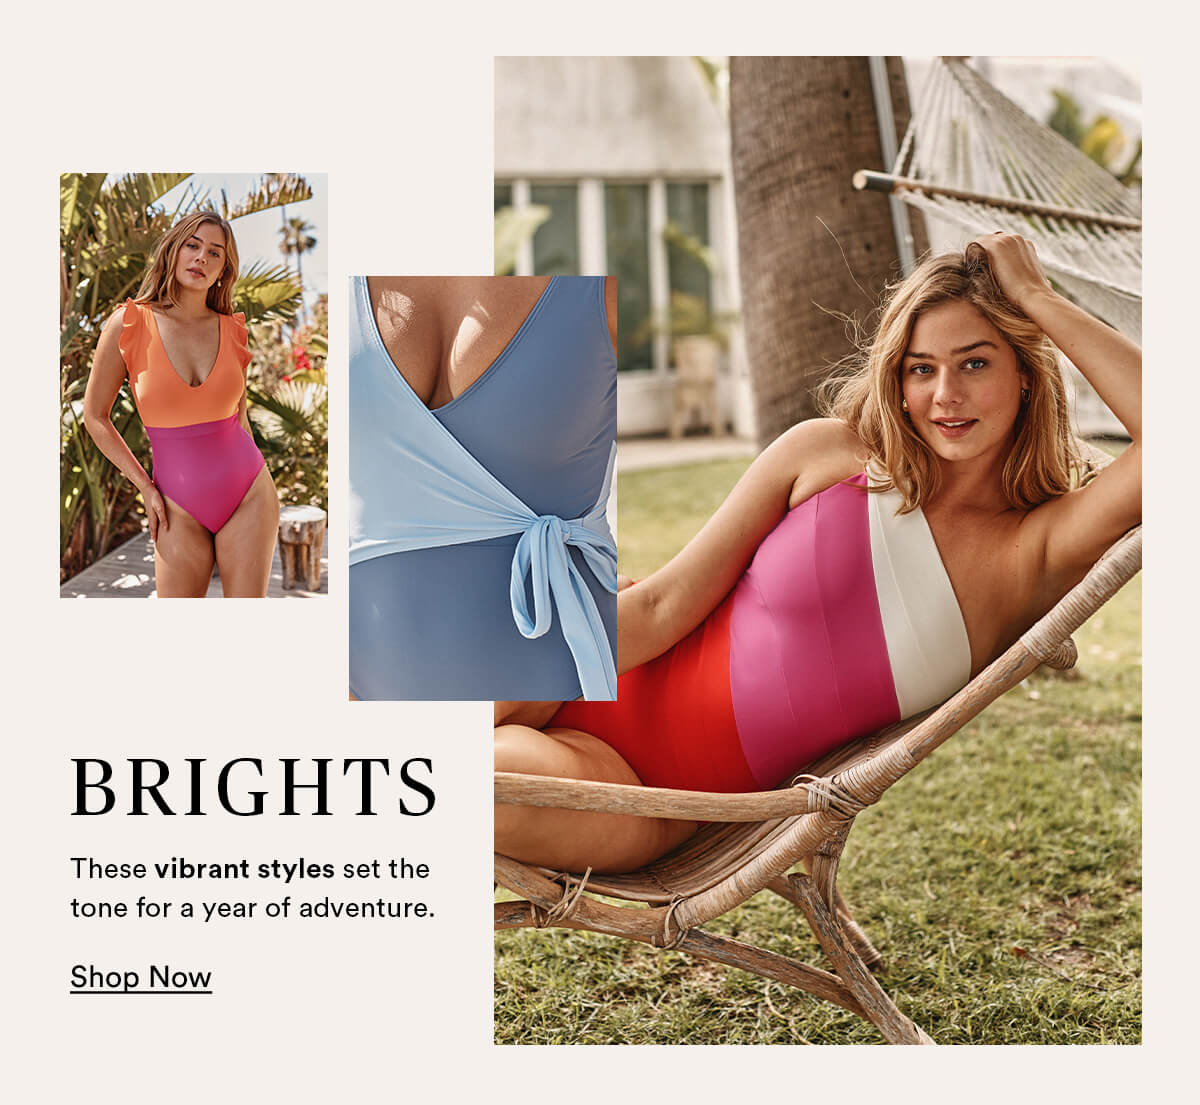 Brights. These vibrant styles set the tone for a year of adventure. Three images of Summersalt suits in bright colors.